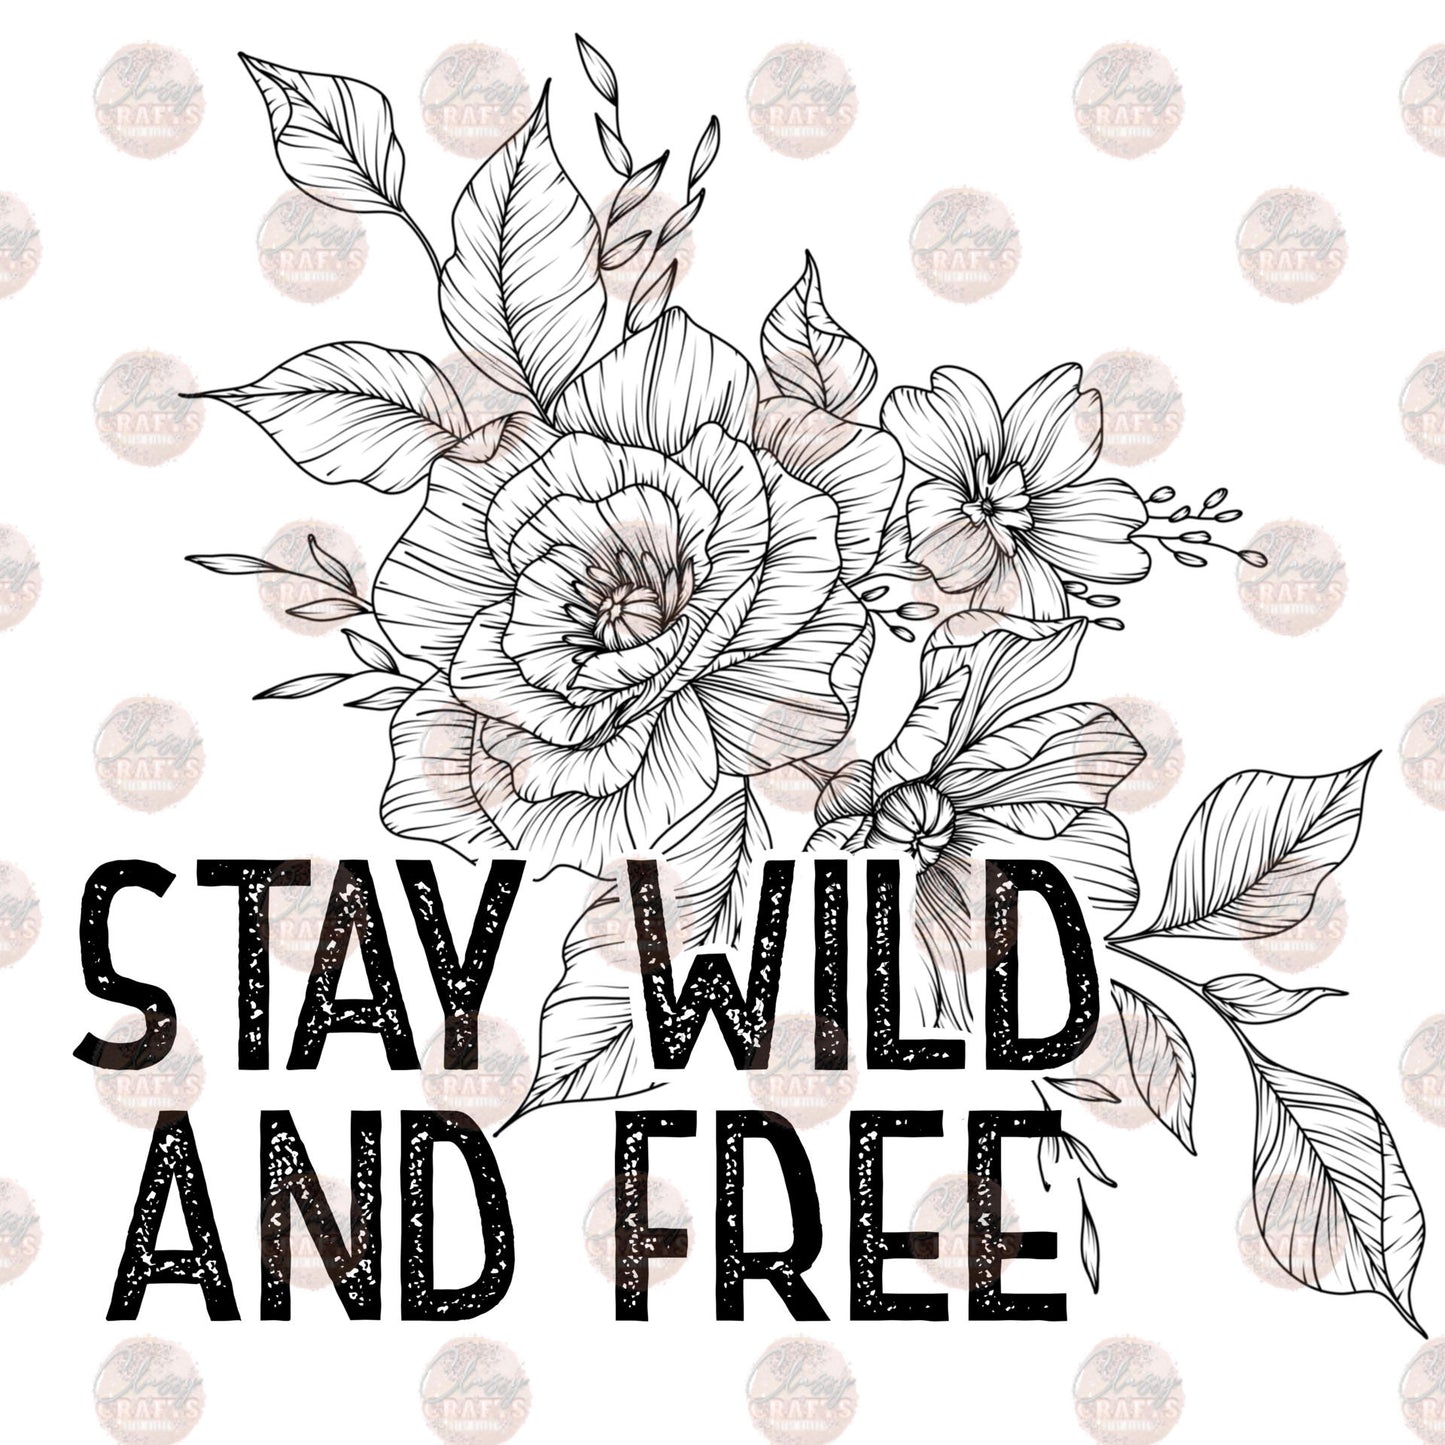 Stay Wild - Sublimation Transfer